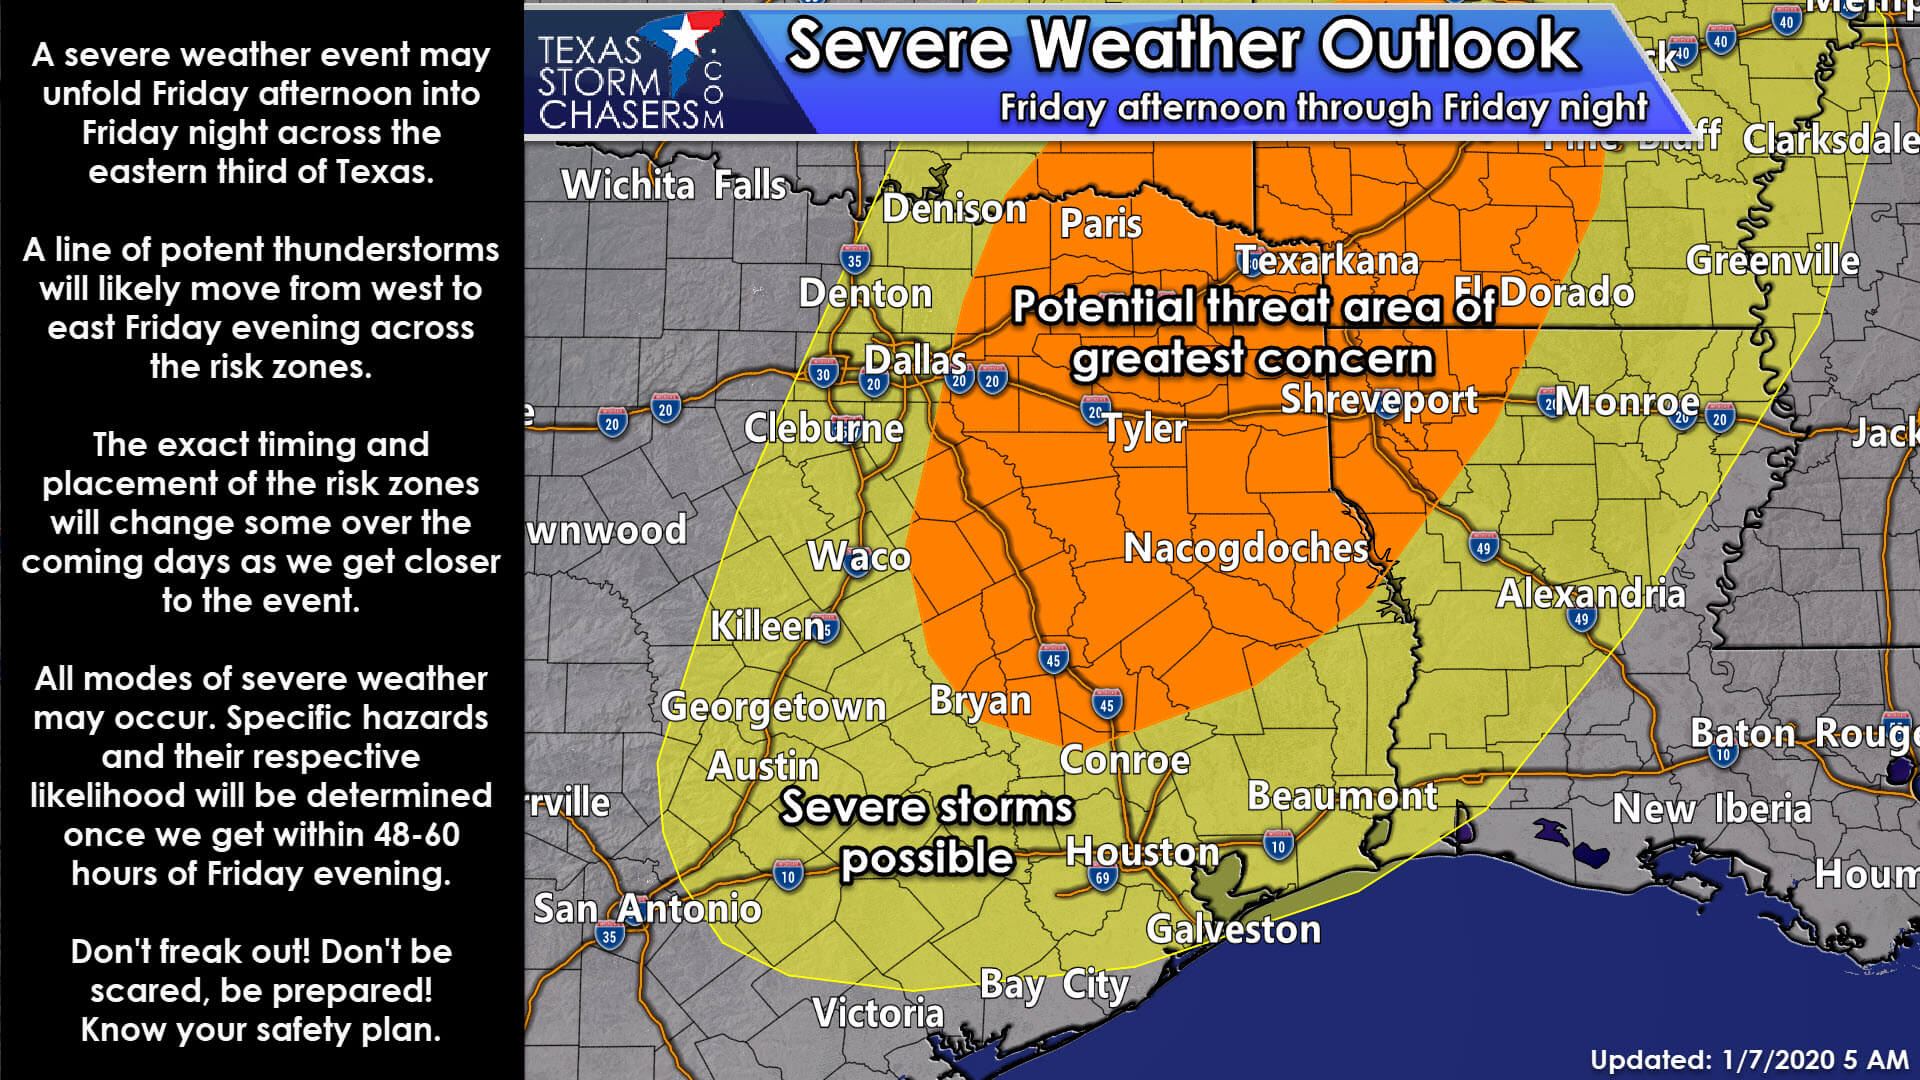 Severe weather still likely Friday afternoon into Friday night in Northeast/East Texas